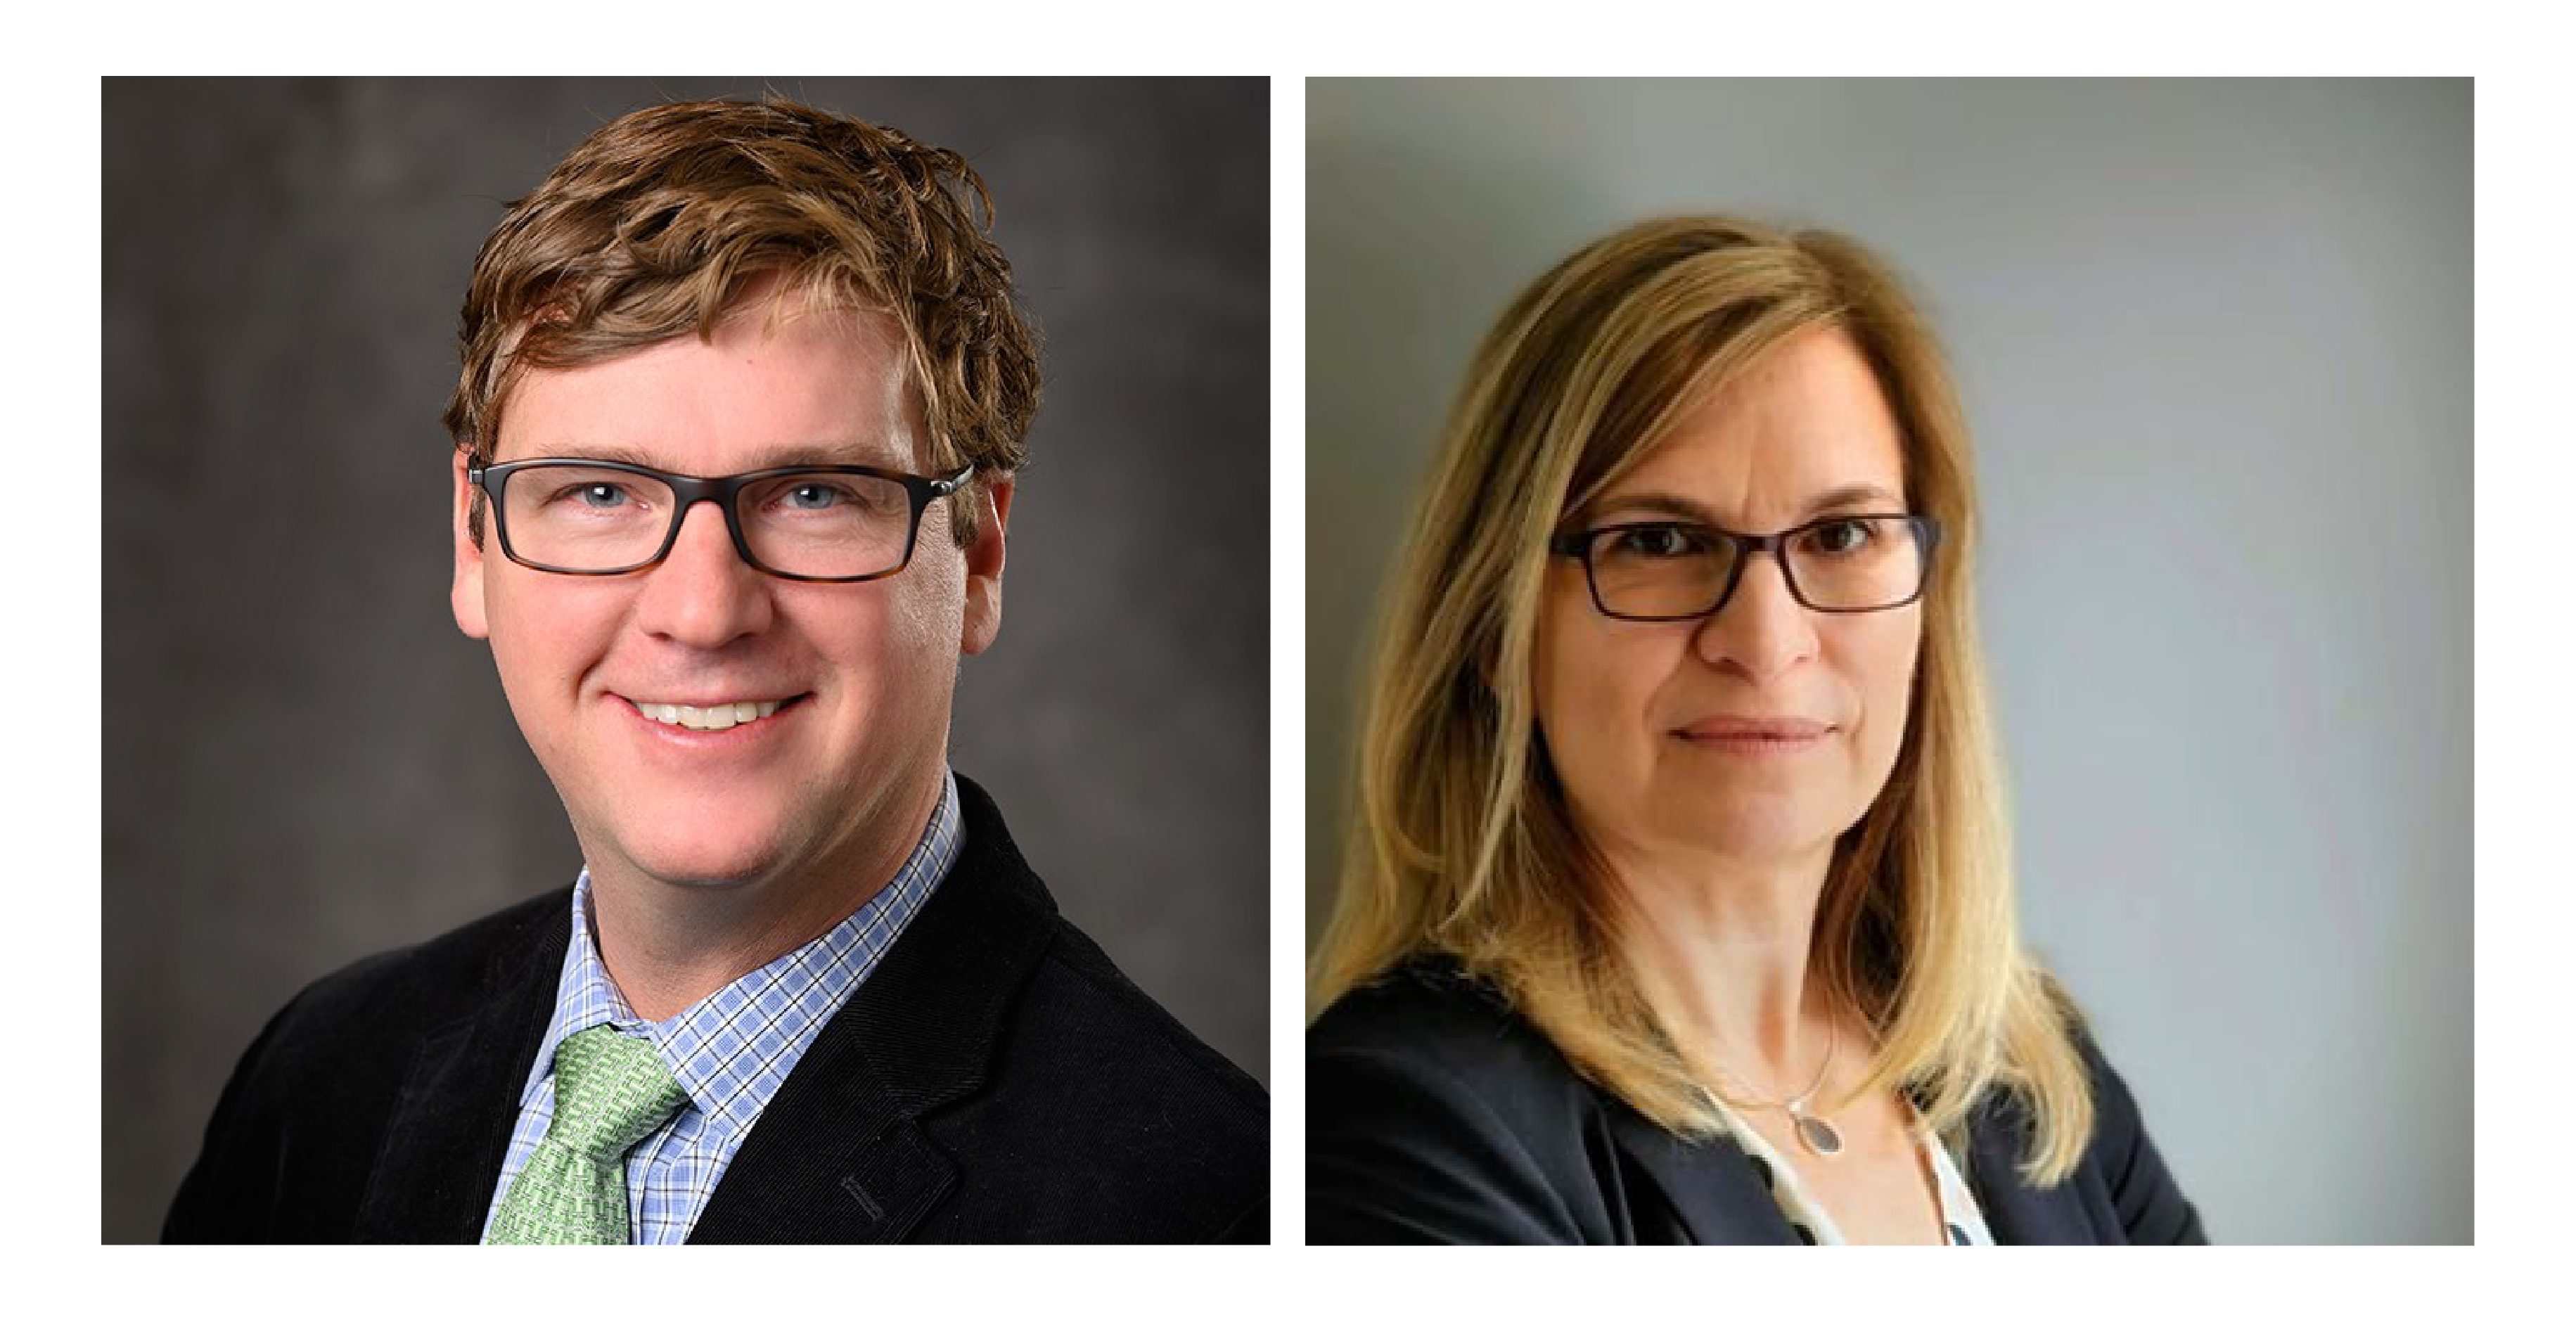 Left, Jeffrey MacKeigan, Ph.D., a man with short hair and glasses. Right, Patricia Soranno, Ph.D., a woman with long hair and glasses